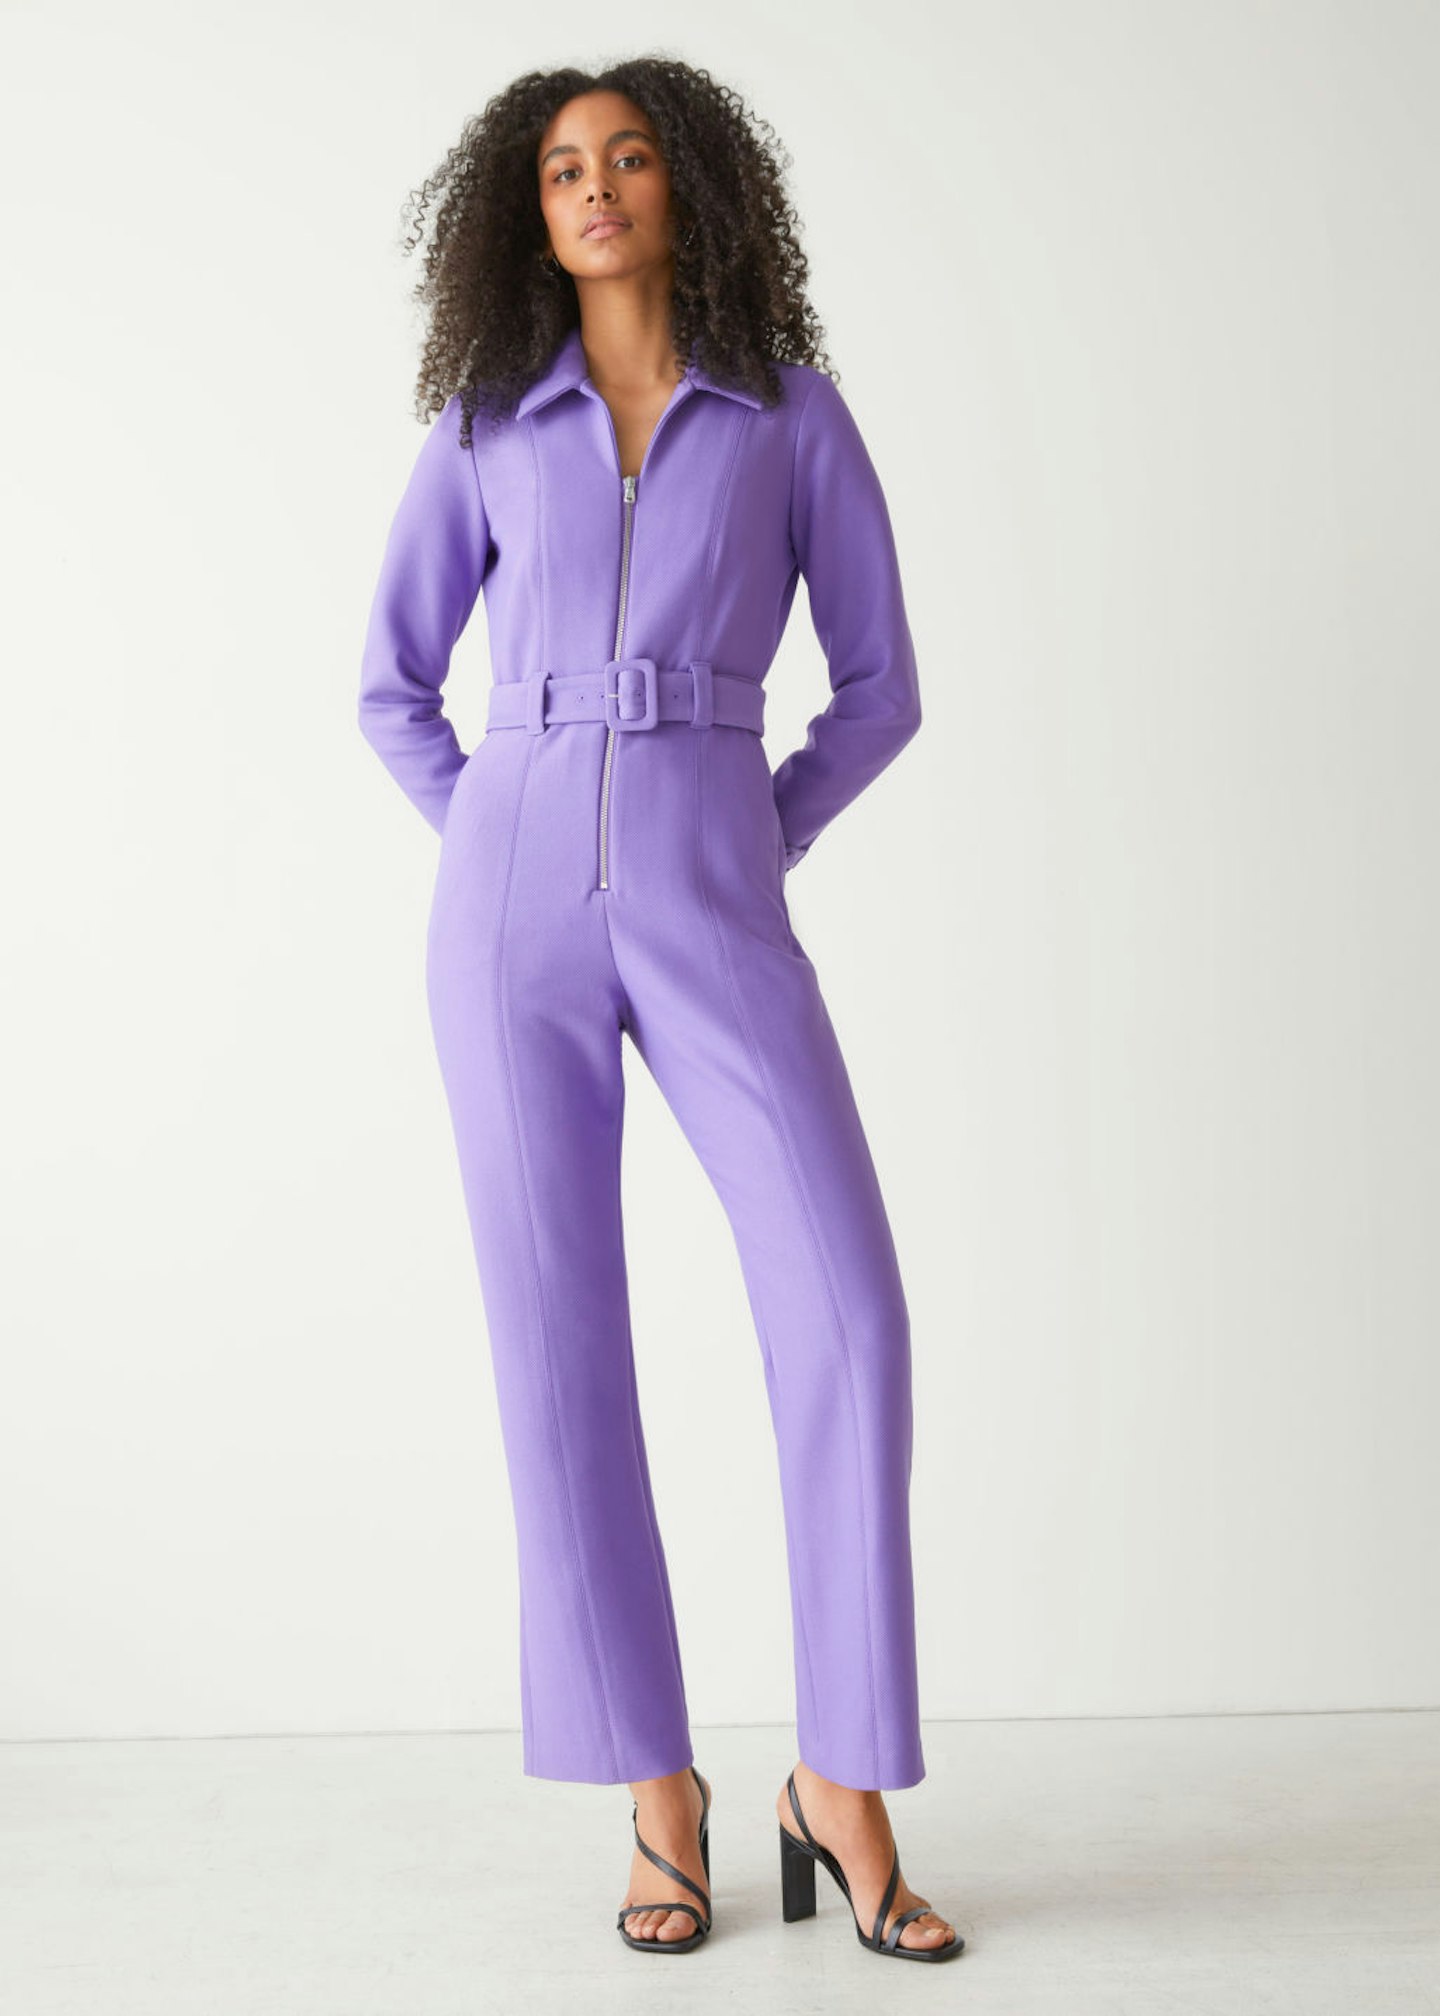 Tuesday - & Other Stories, Belted Collared Jumpsuit, £120